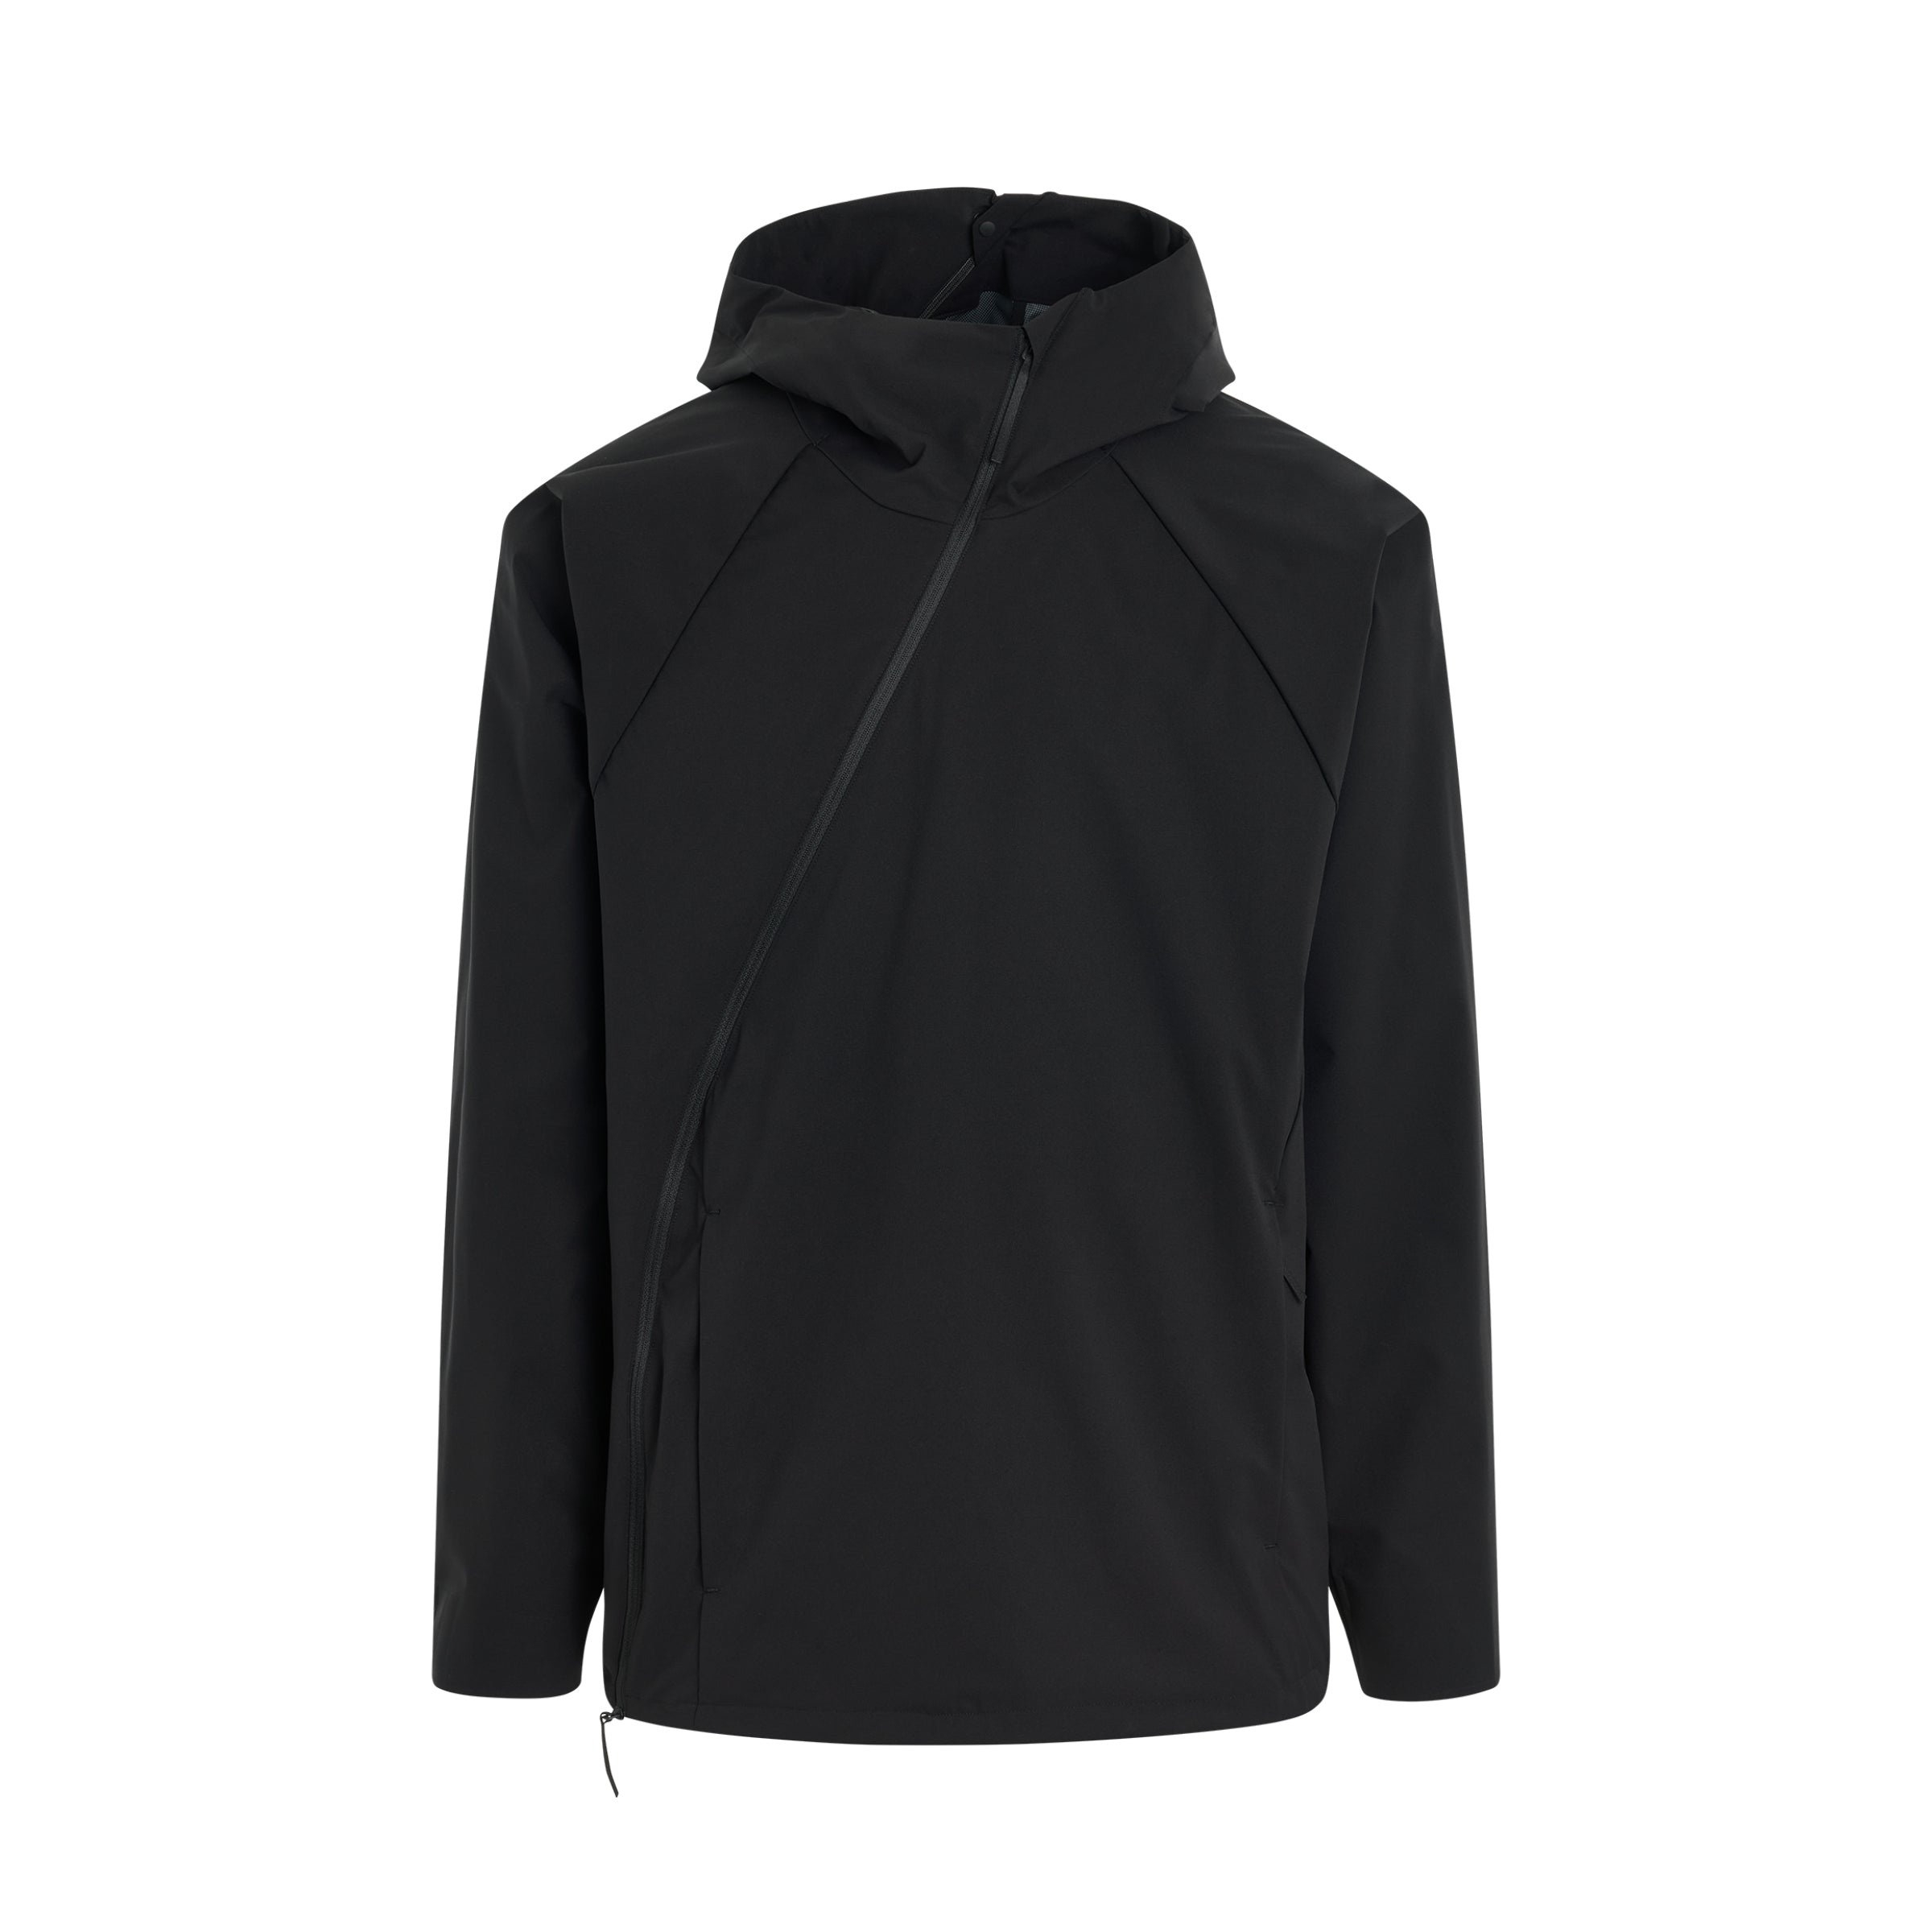 6.0 Technical Jacket (Center) in Black - 1